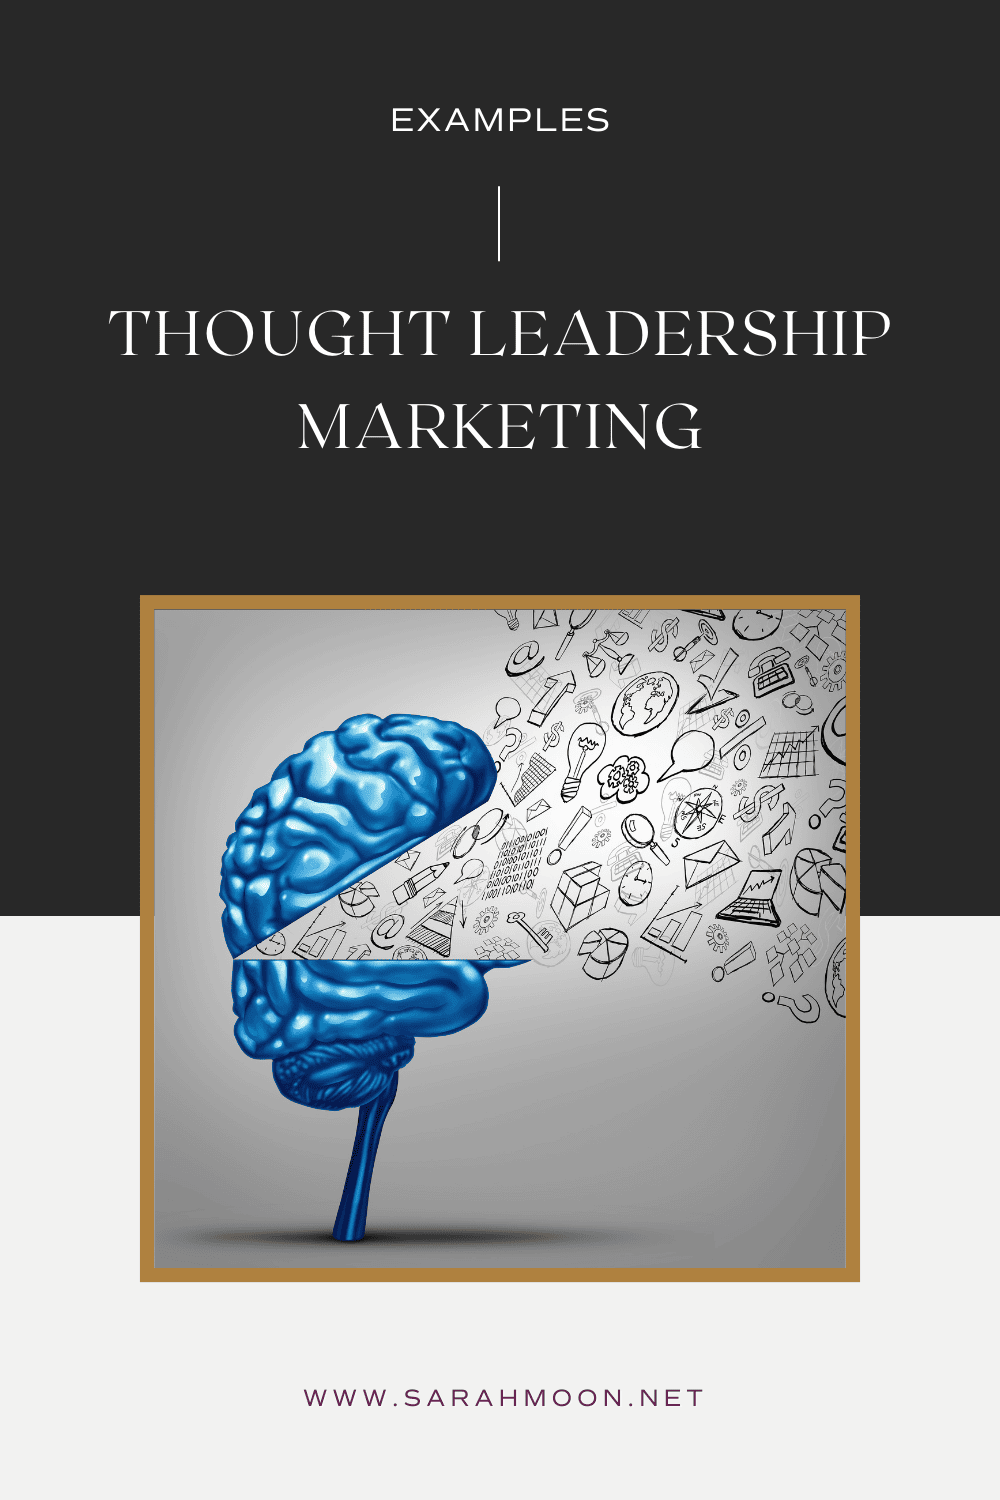 Examples of Thought Leadership Marketing